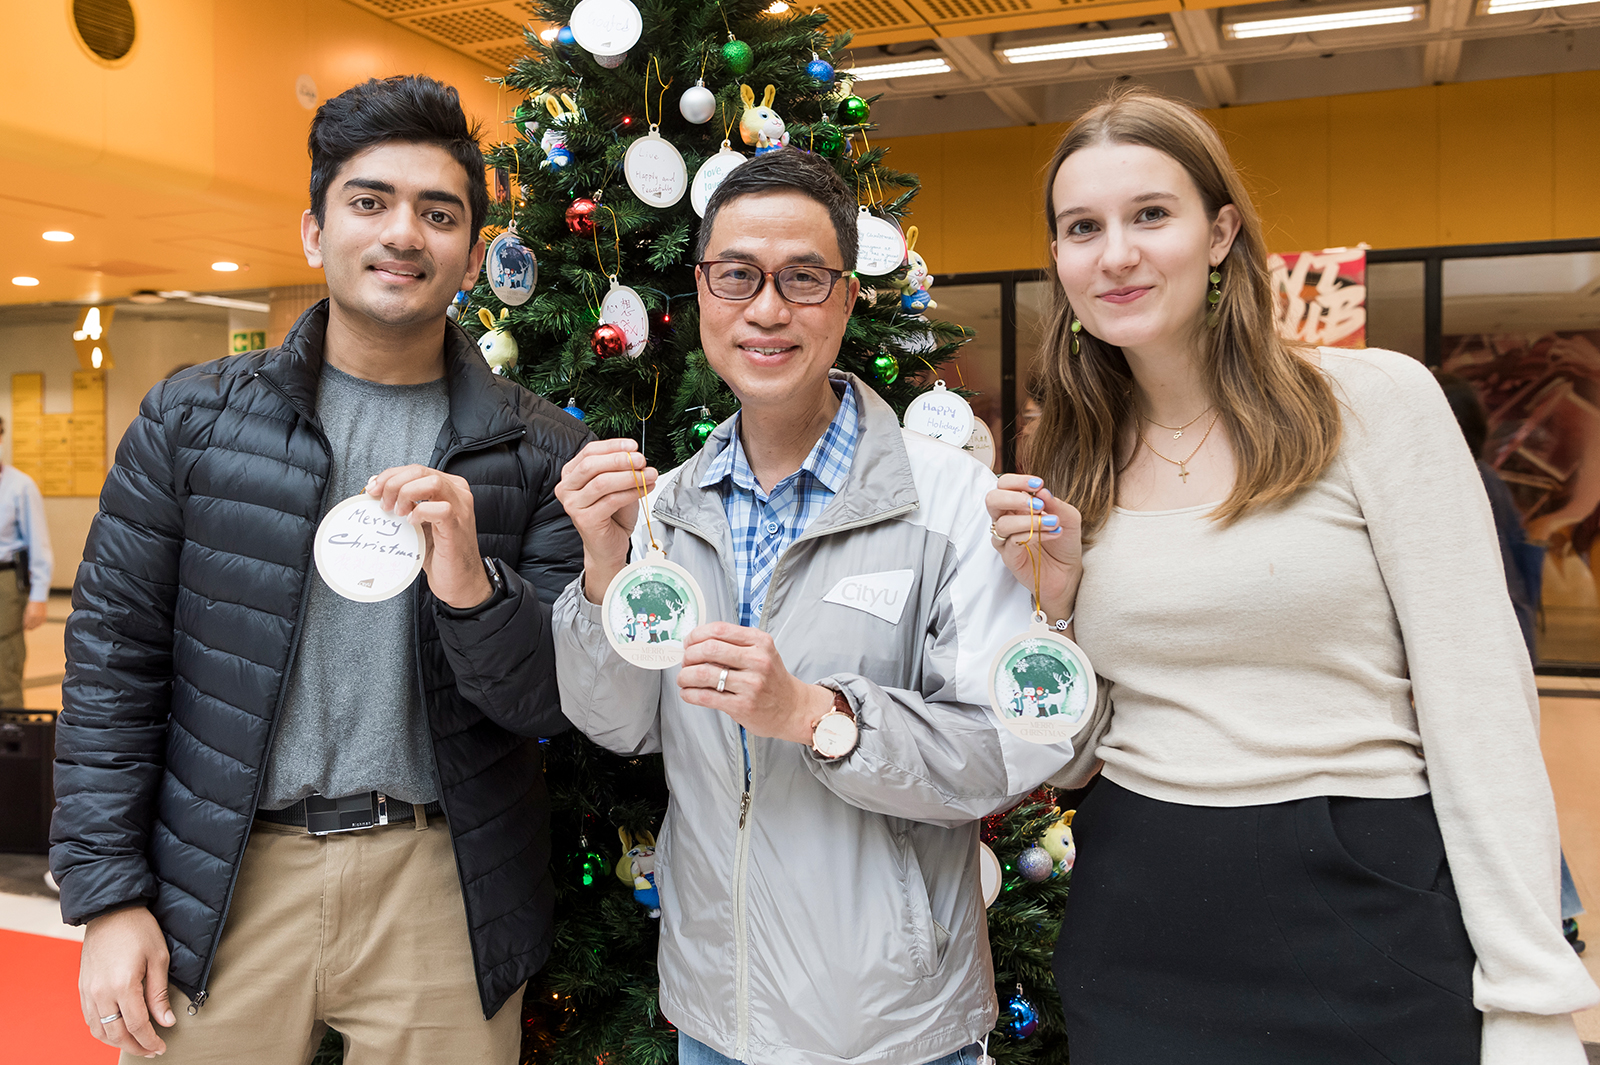 Professor Chung (middle) and students convey their blessings through festive-themed cards.